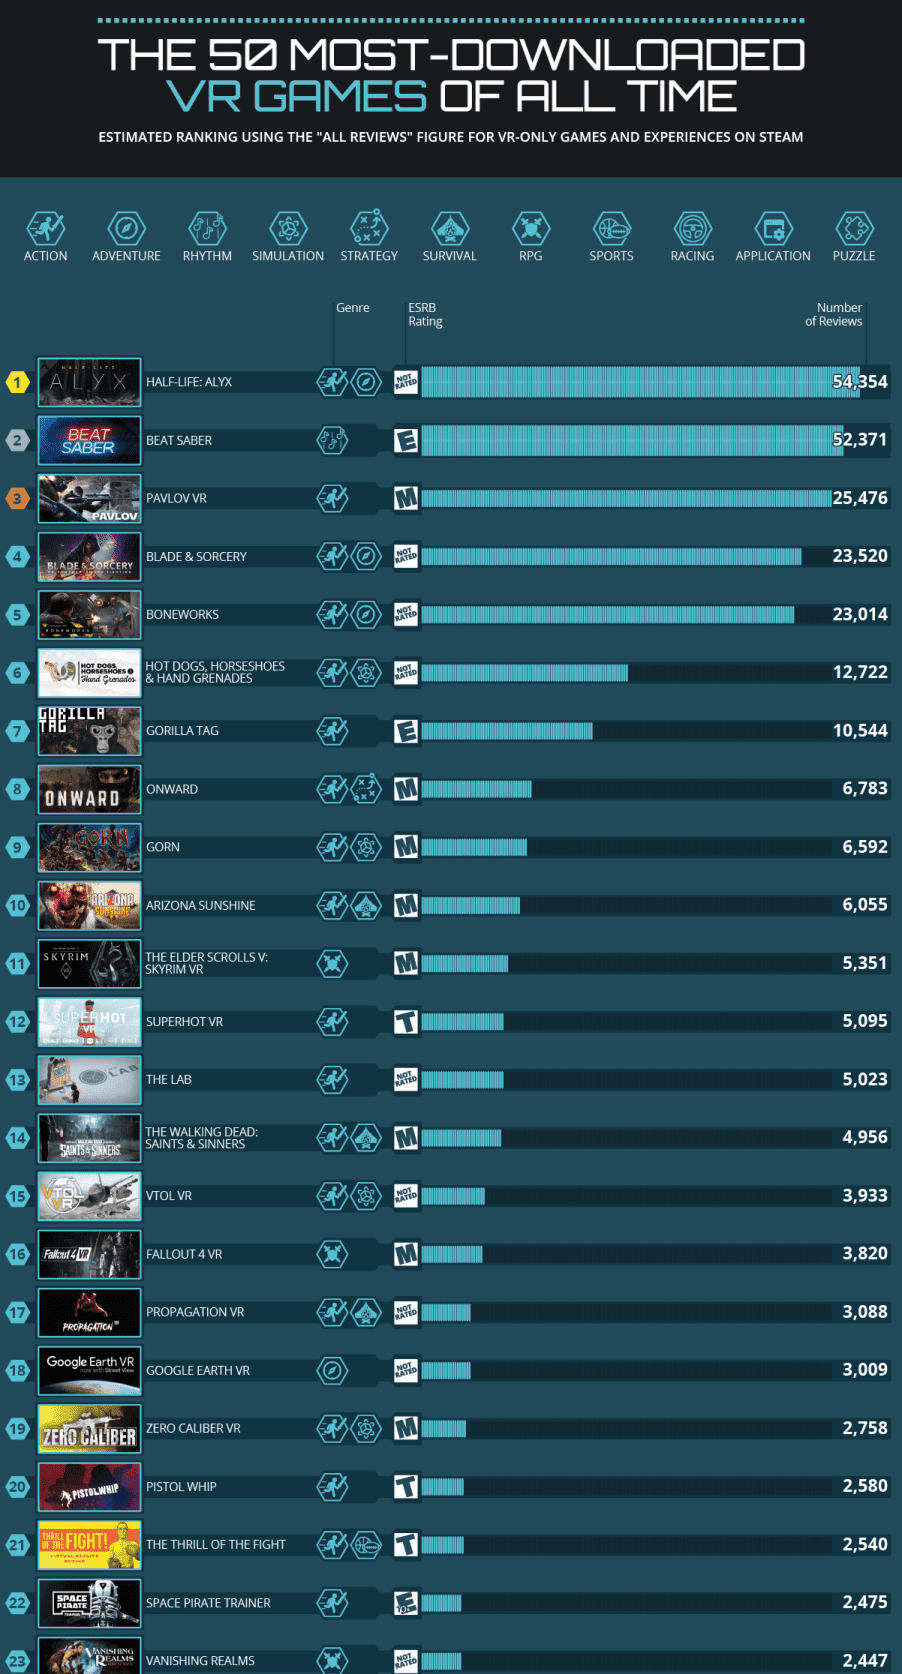 most-downloaded-vr-games-all-time - Infographic